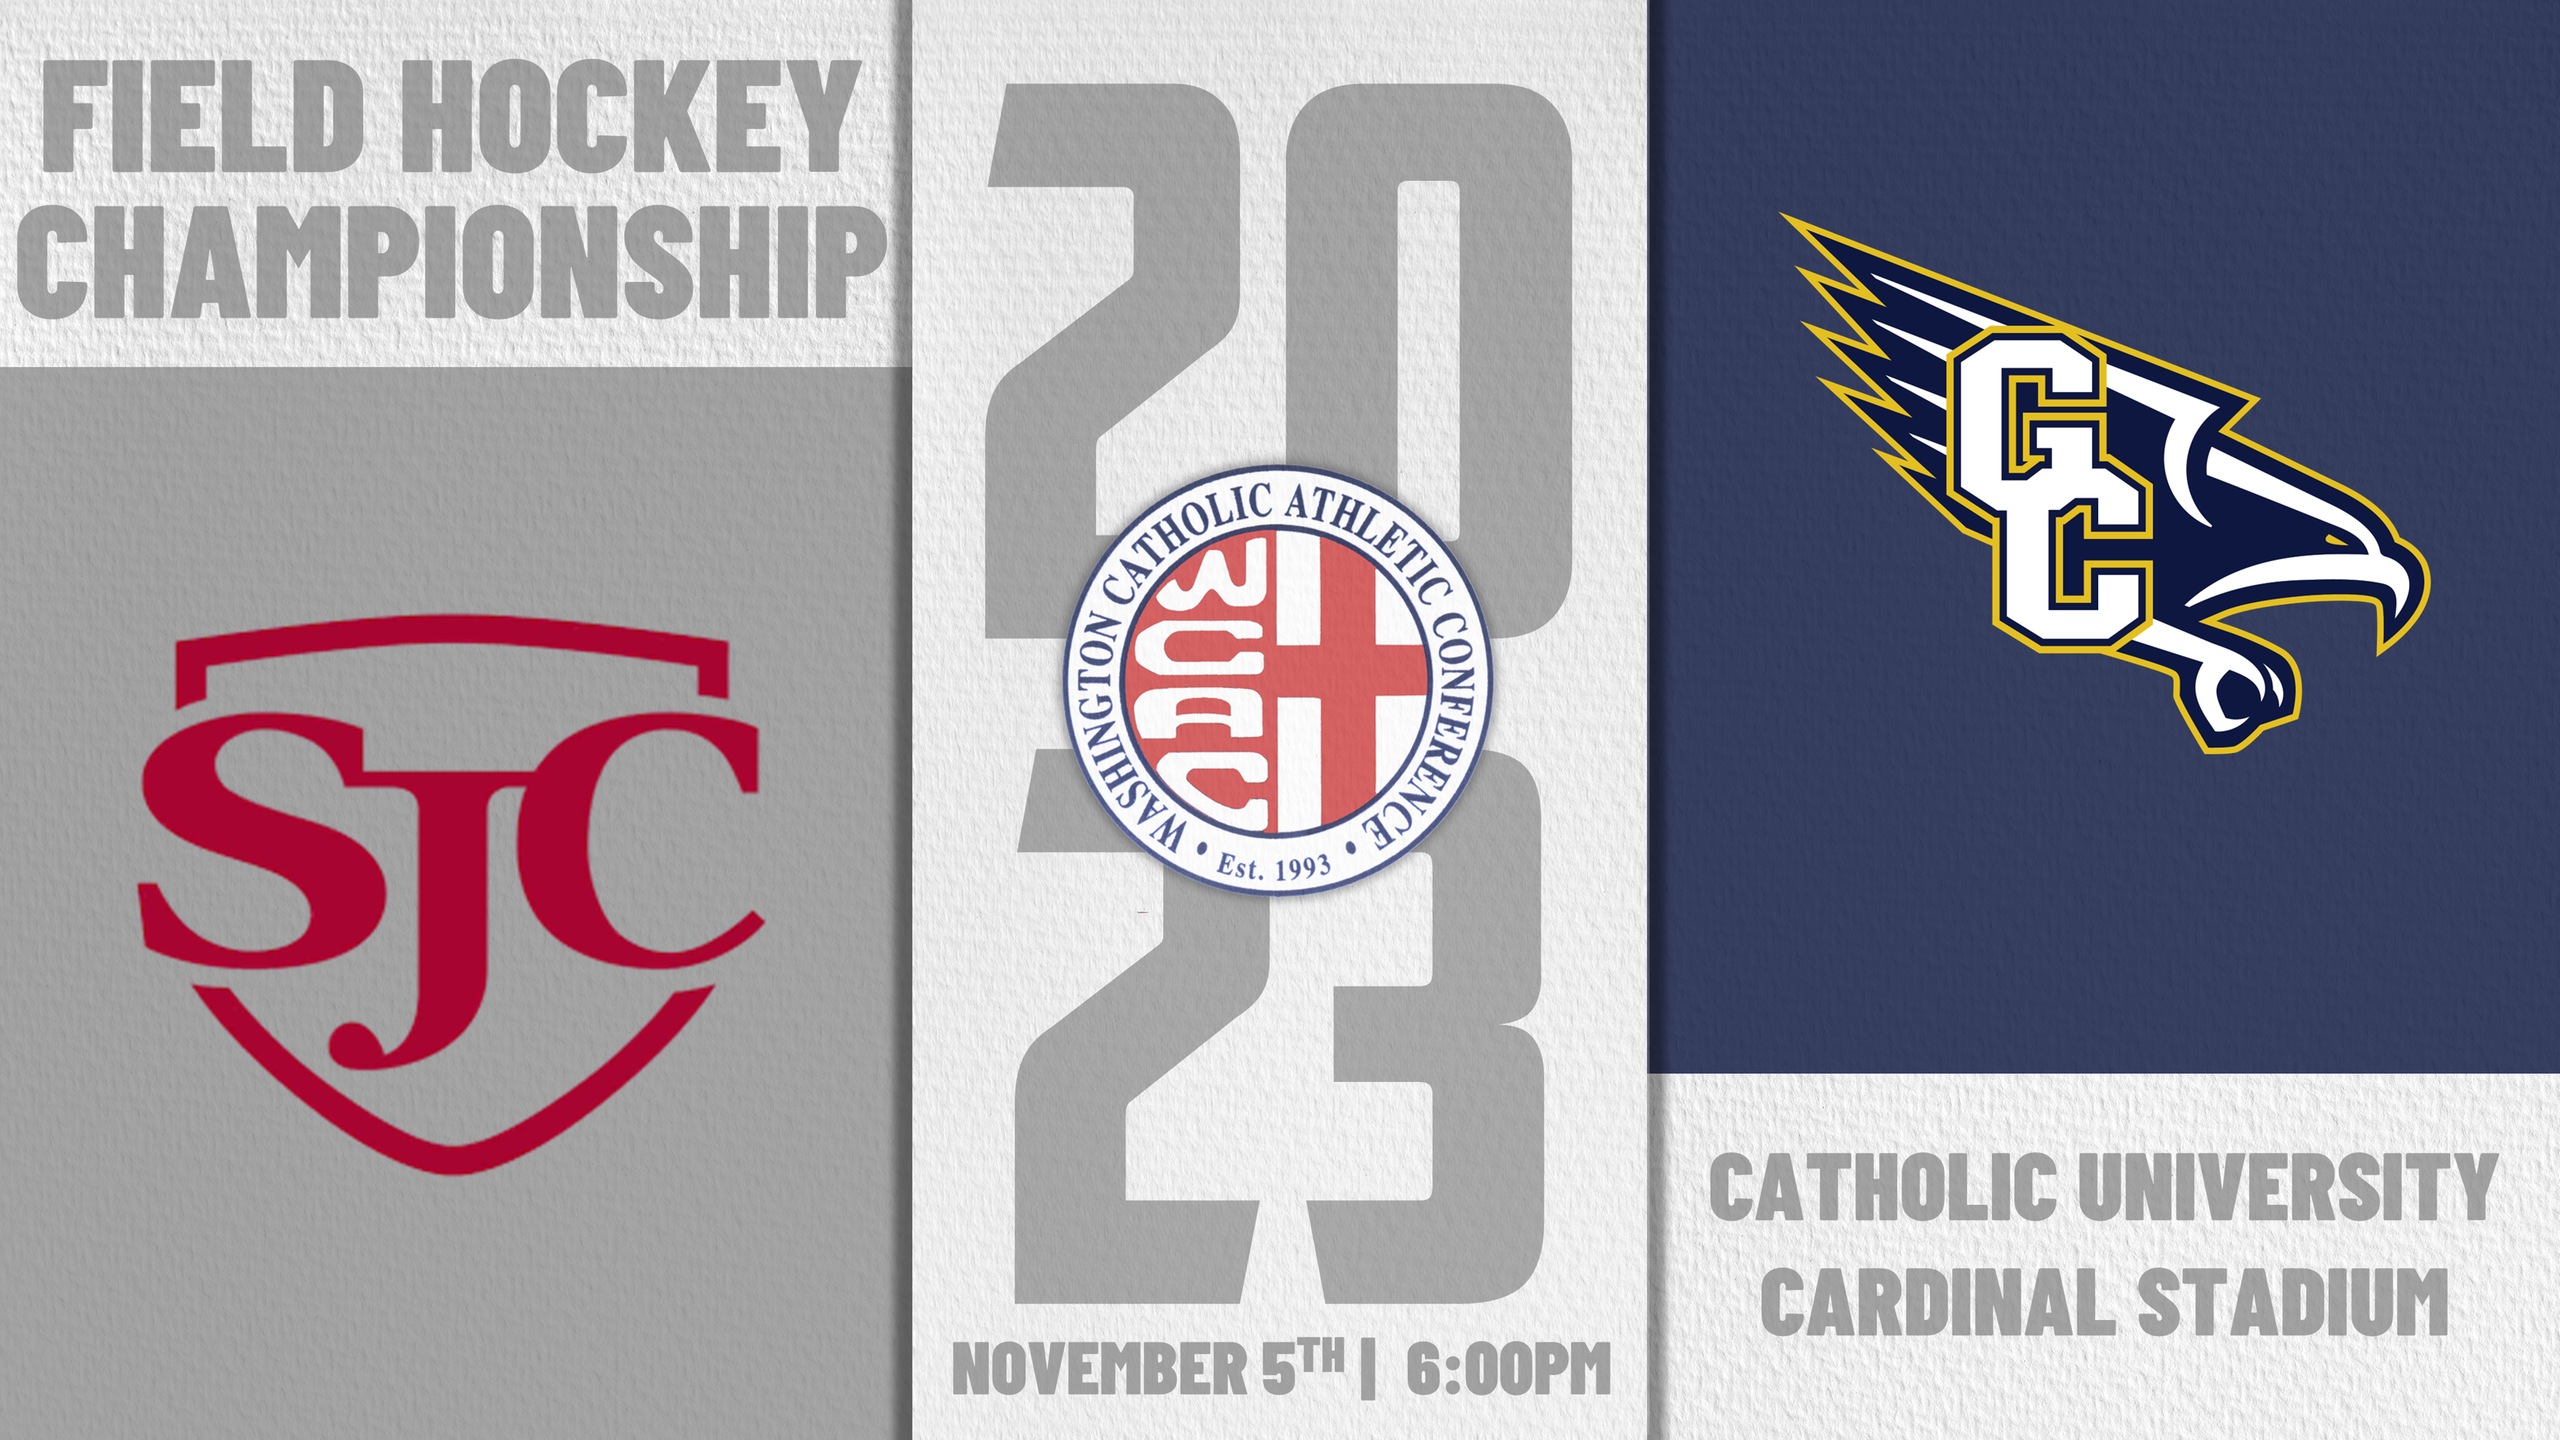 Field Hockey Championship is on Nov 5th - Click Here for Tickets